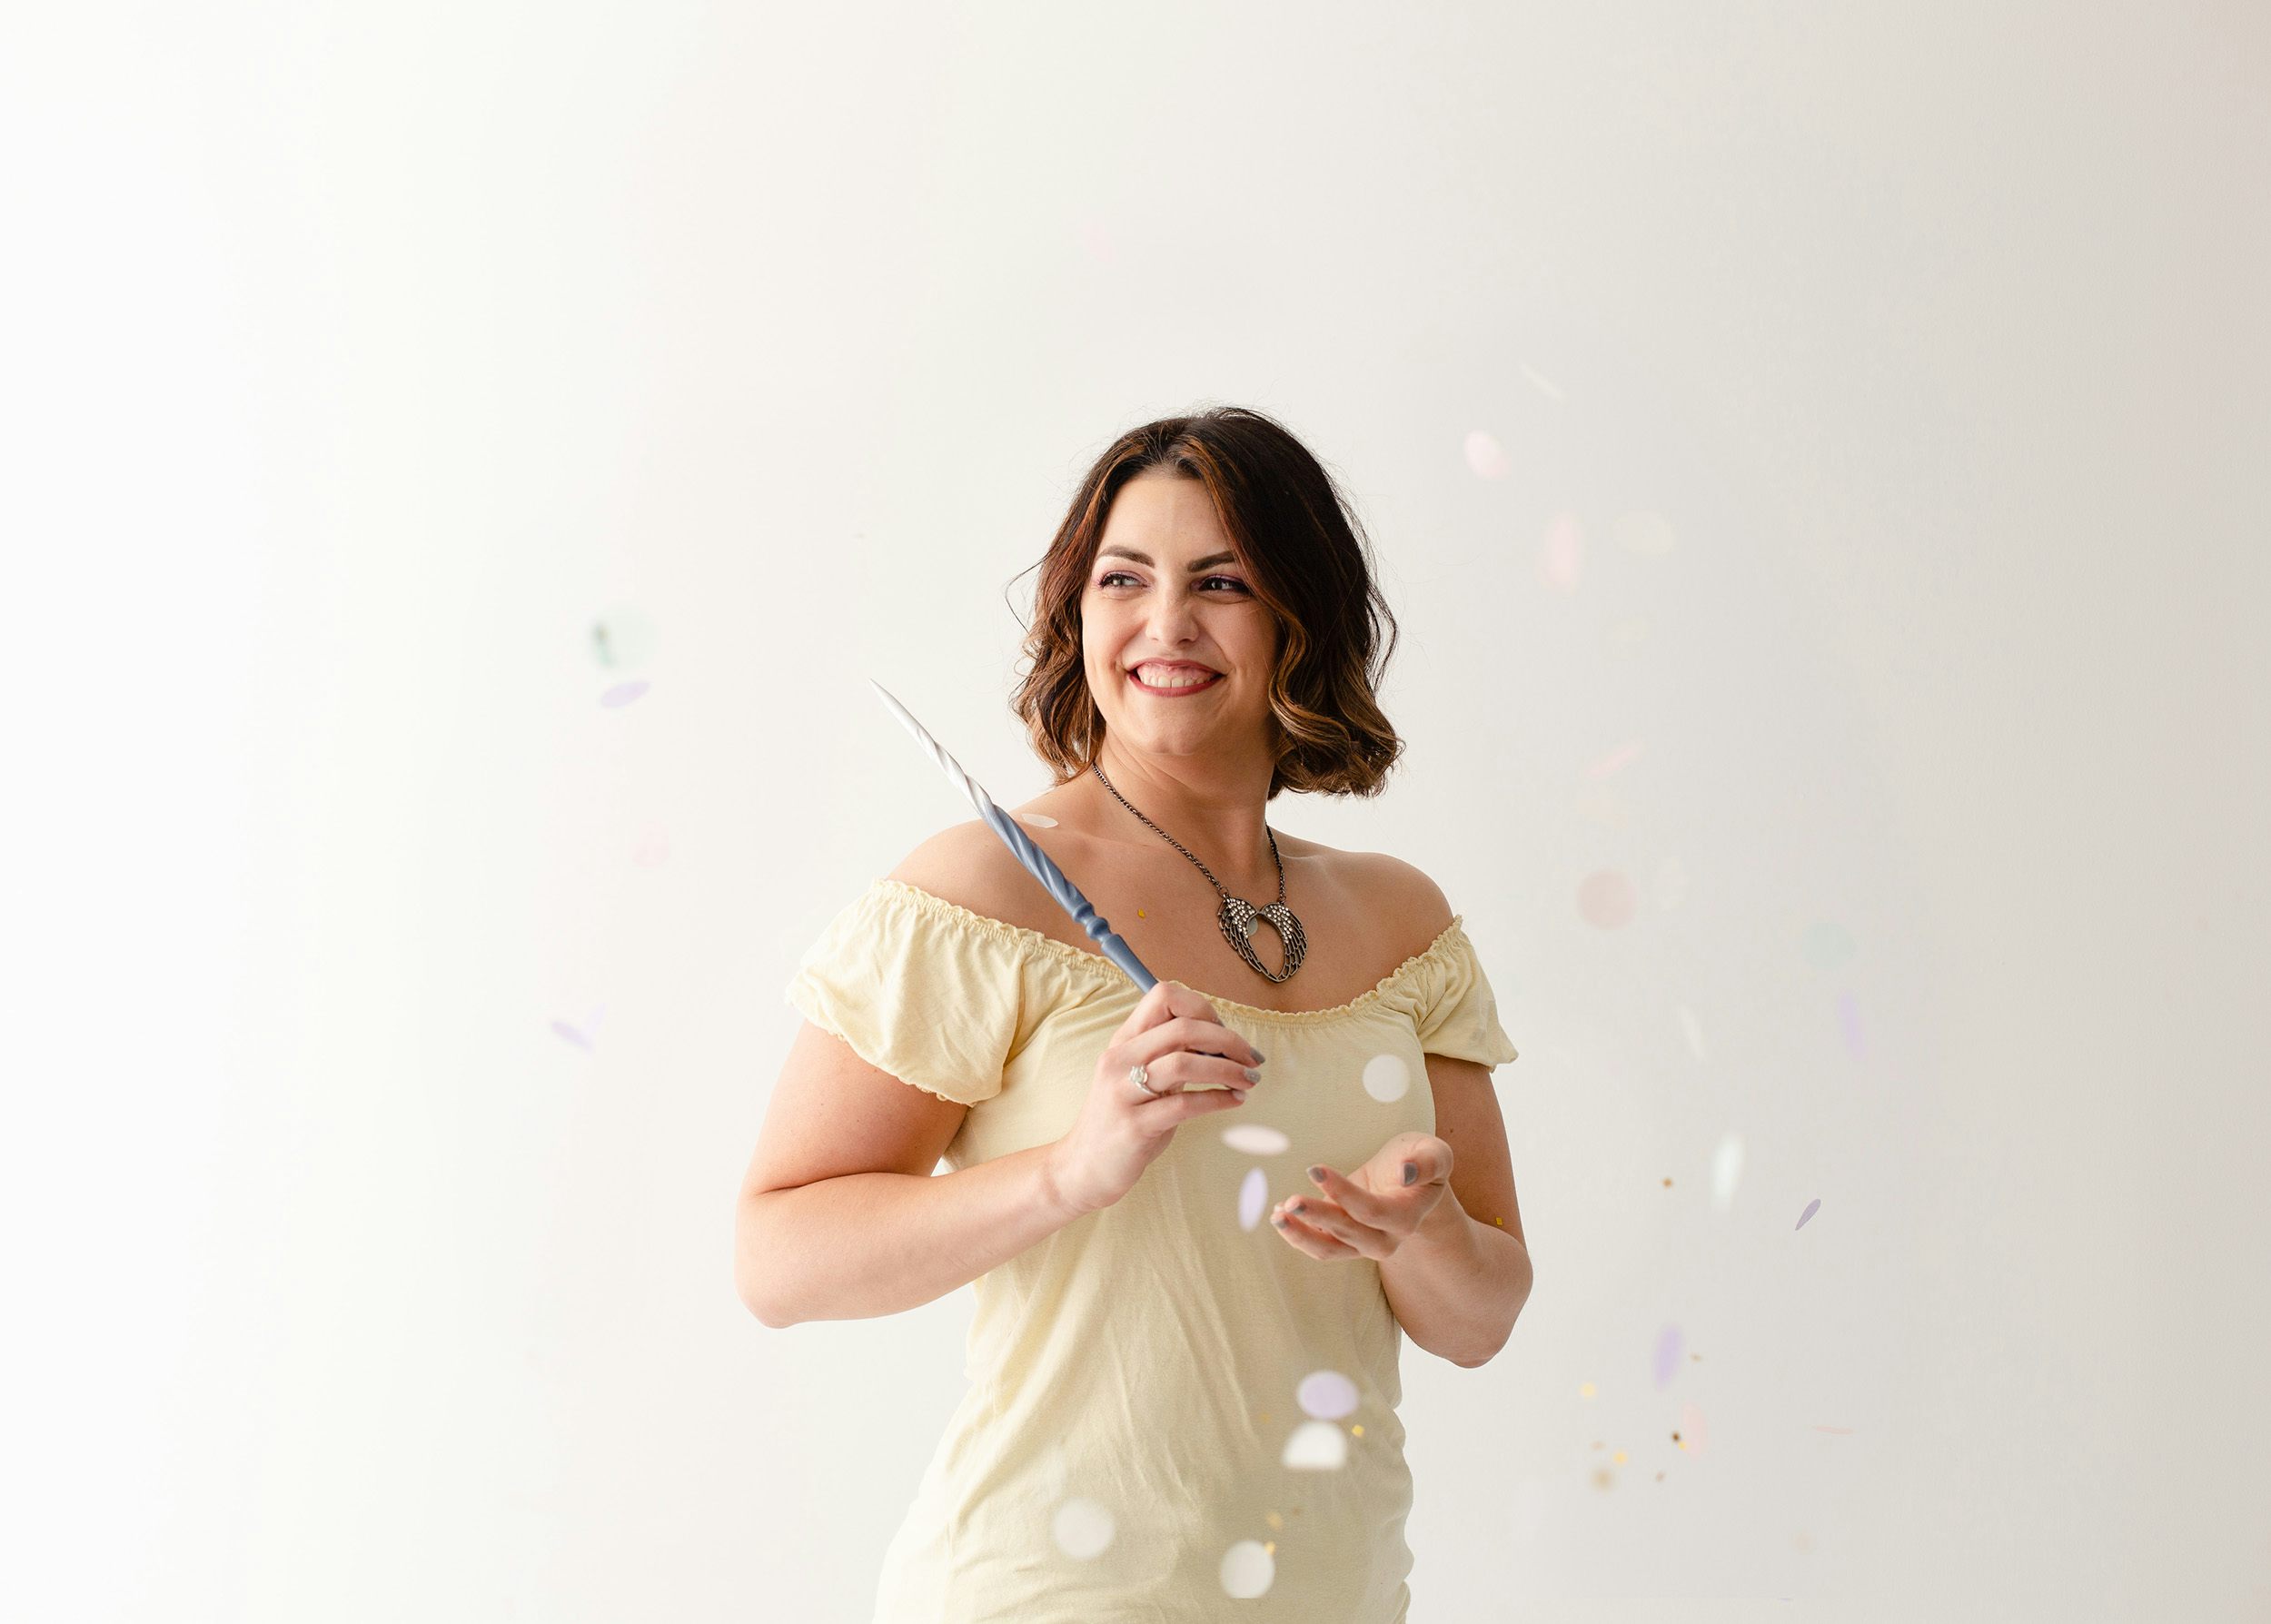 Megan smiling widely as she points a magic wand over her left shoulder, confetti fluttering around her